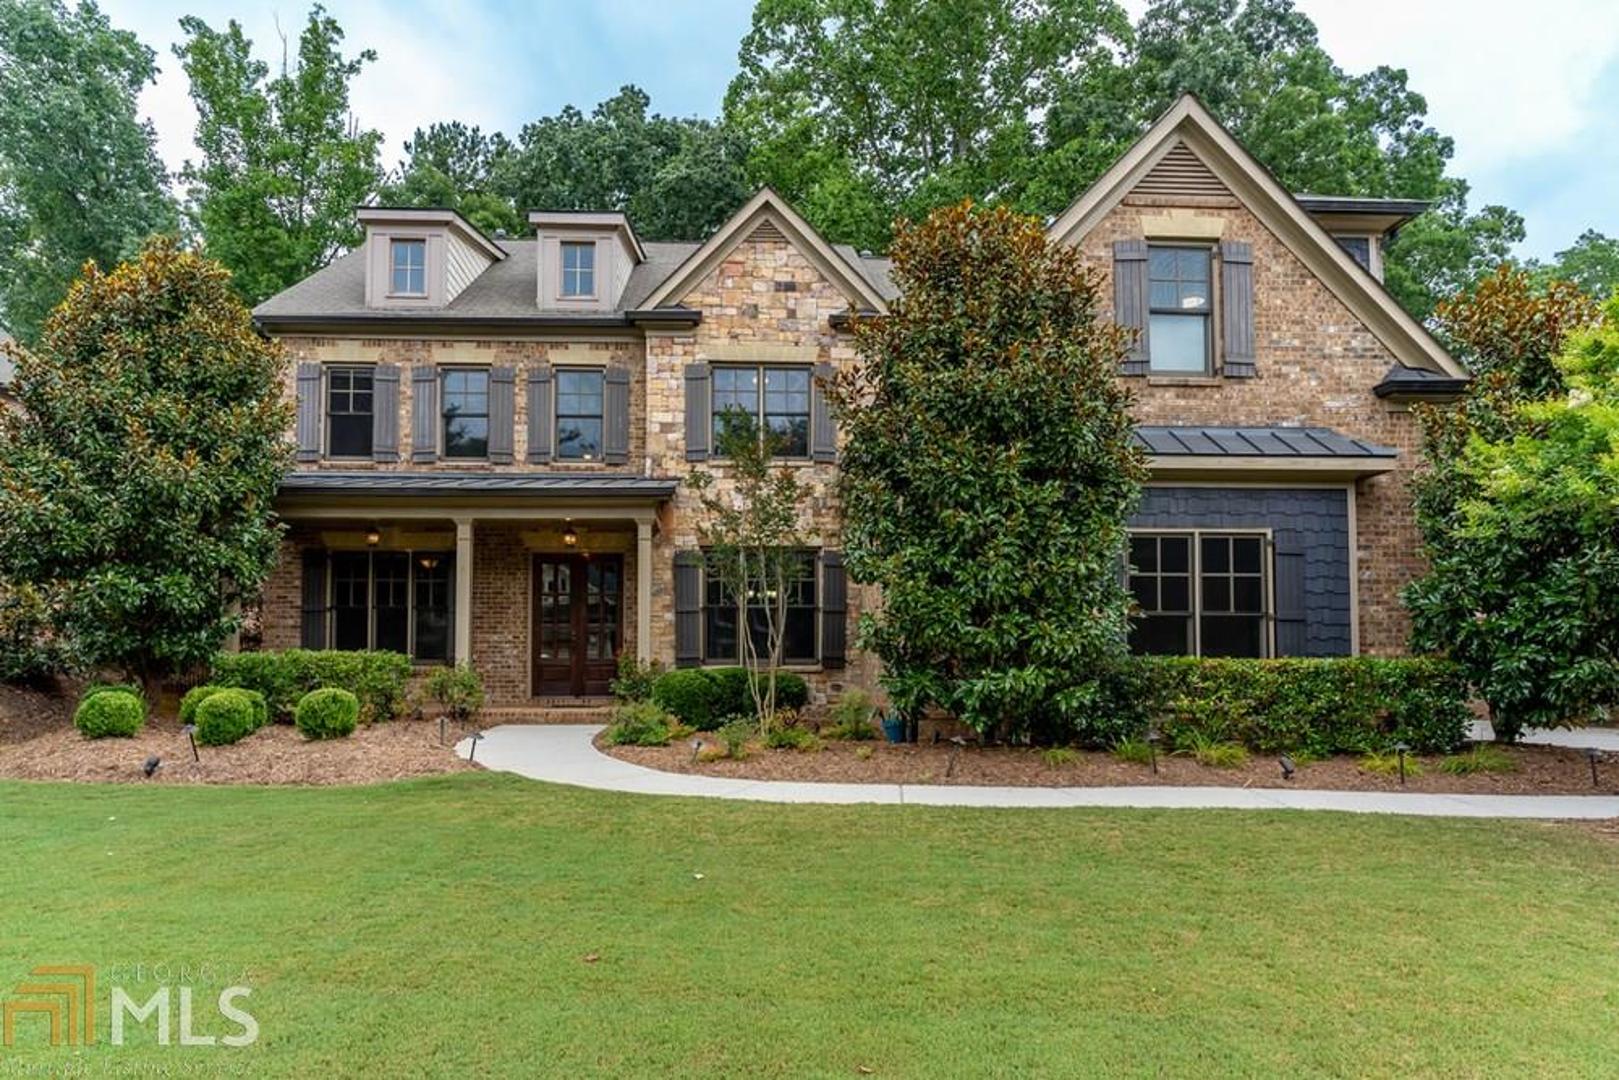 Gorgeous brick and stone Custom home with front porch, 3 car garage, 6 bedrooms and finished terrace level.